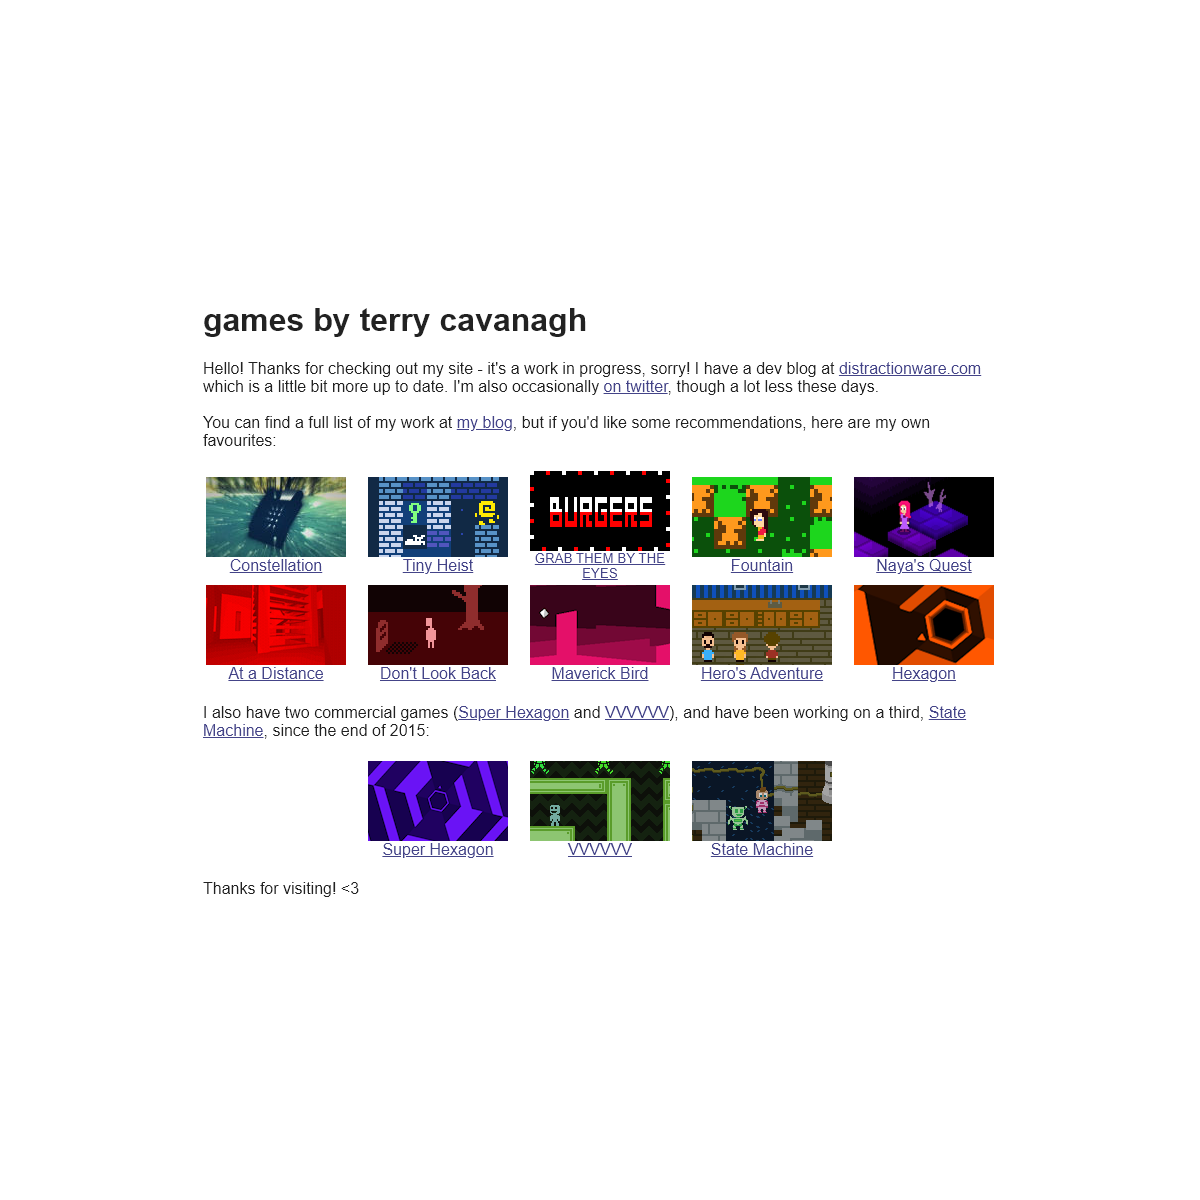 A complete backup of terrycavanaghgames.com